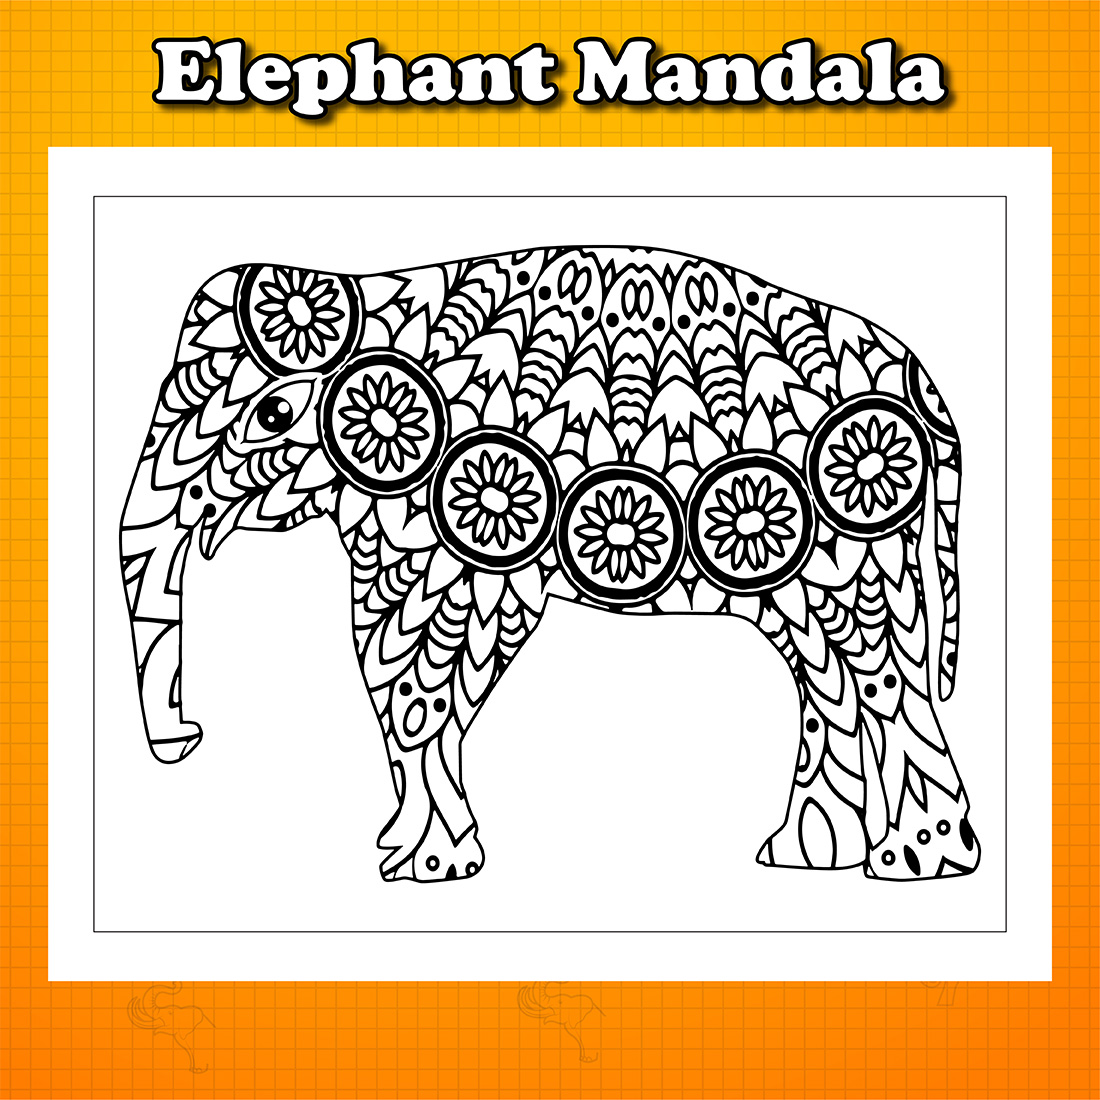 Pages Elephant Mandala Coloring Book cover image.